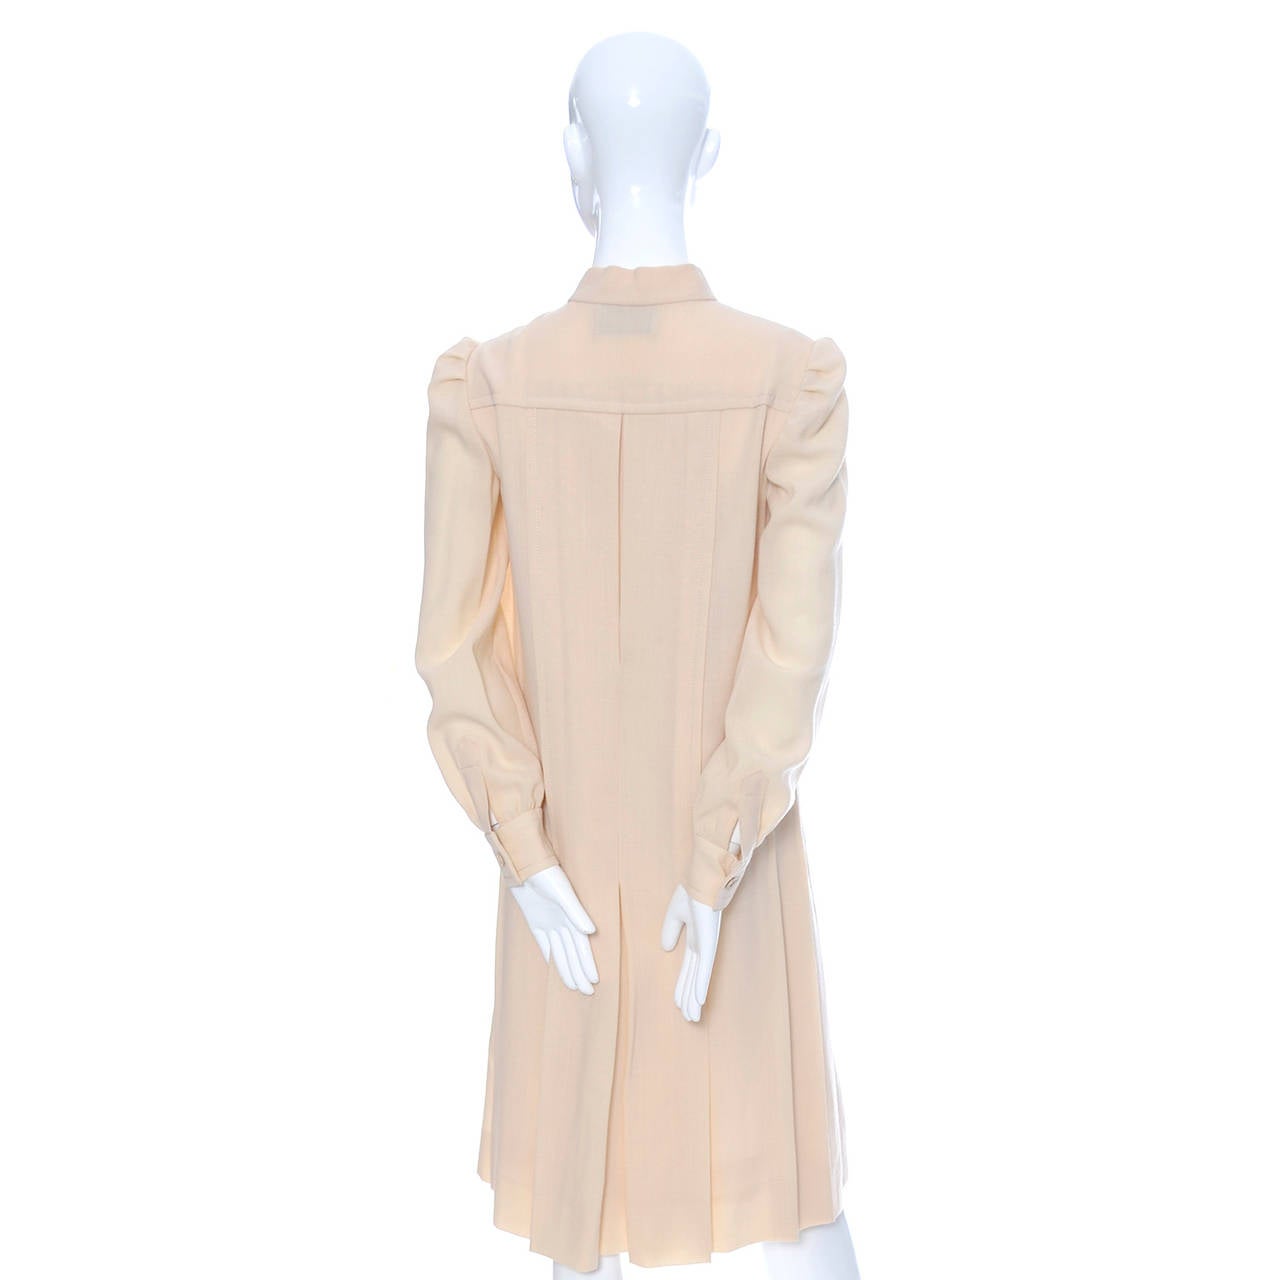 This lovely vintage cream wool pleated shift dress was exquisitely made in France in the 1970's for Marshall Field. I acquired several dresses with this label from an estate of high end designer couture and boutique vintage dresses. They are all